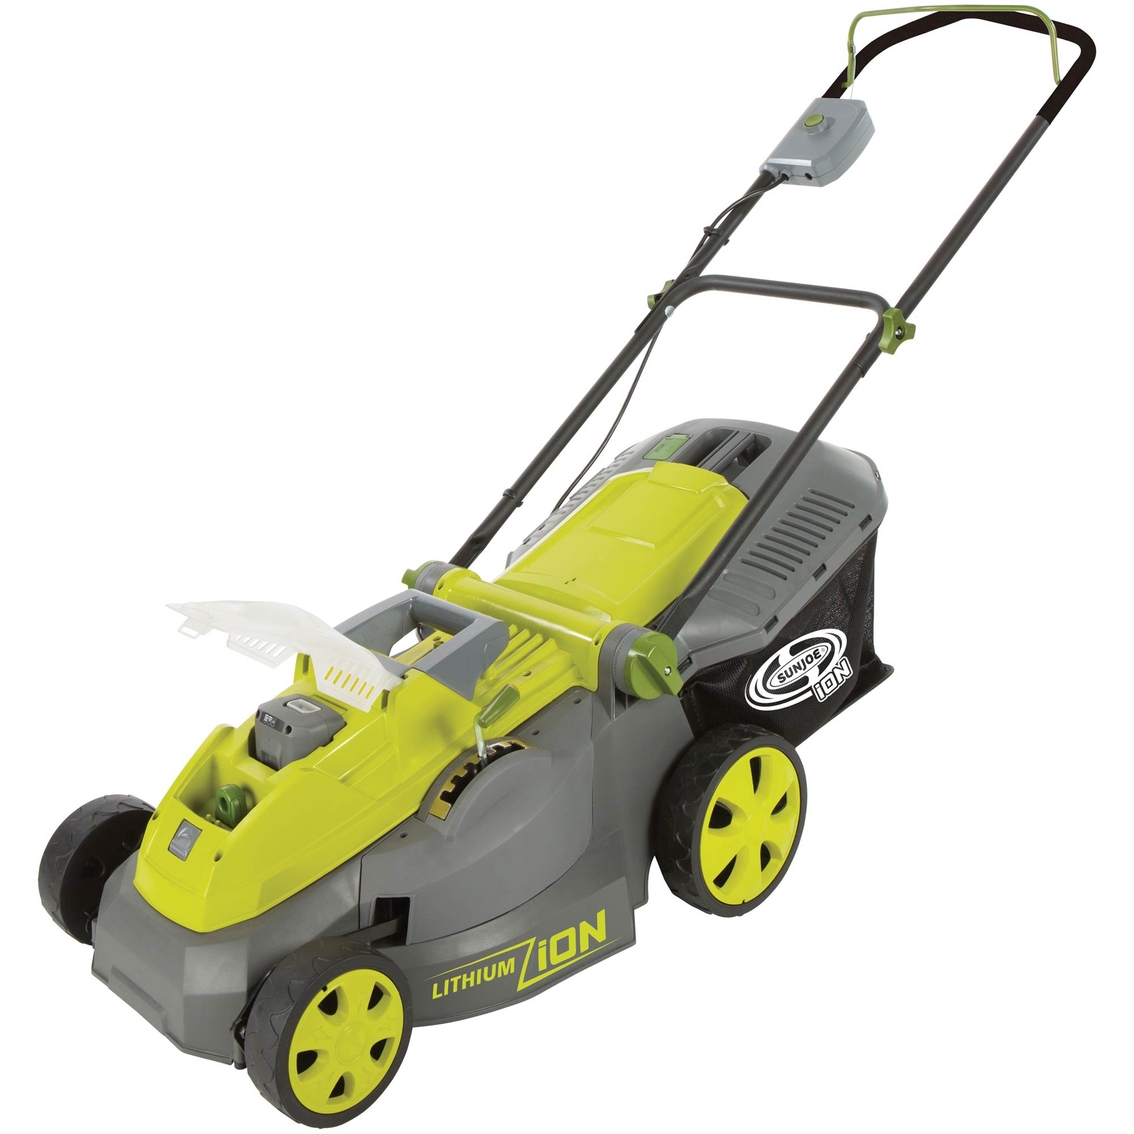 Sun Joe iON16LM 40-Volt Cordless 16 in. Lawn Mower with Brushless Motor - Image 2 of 5